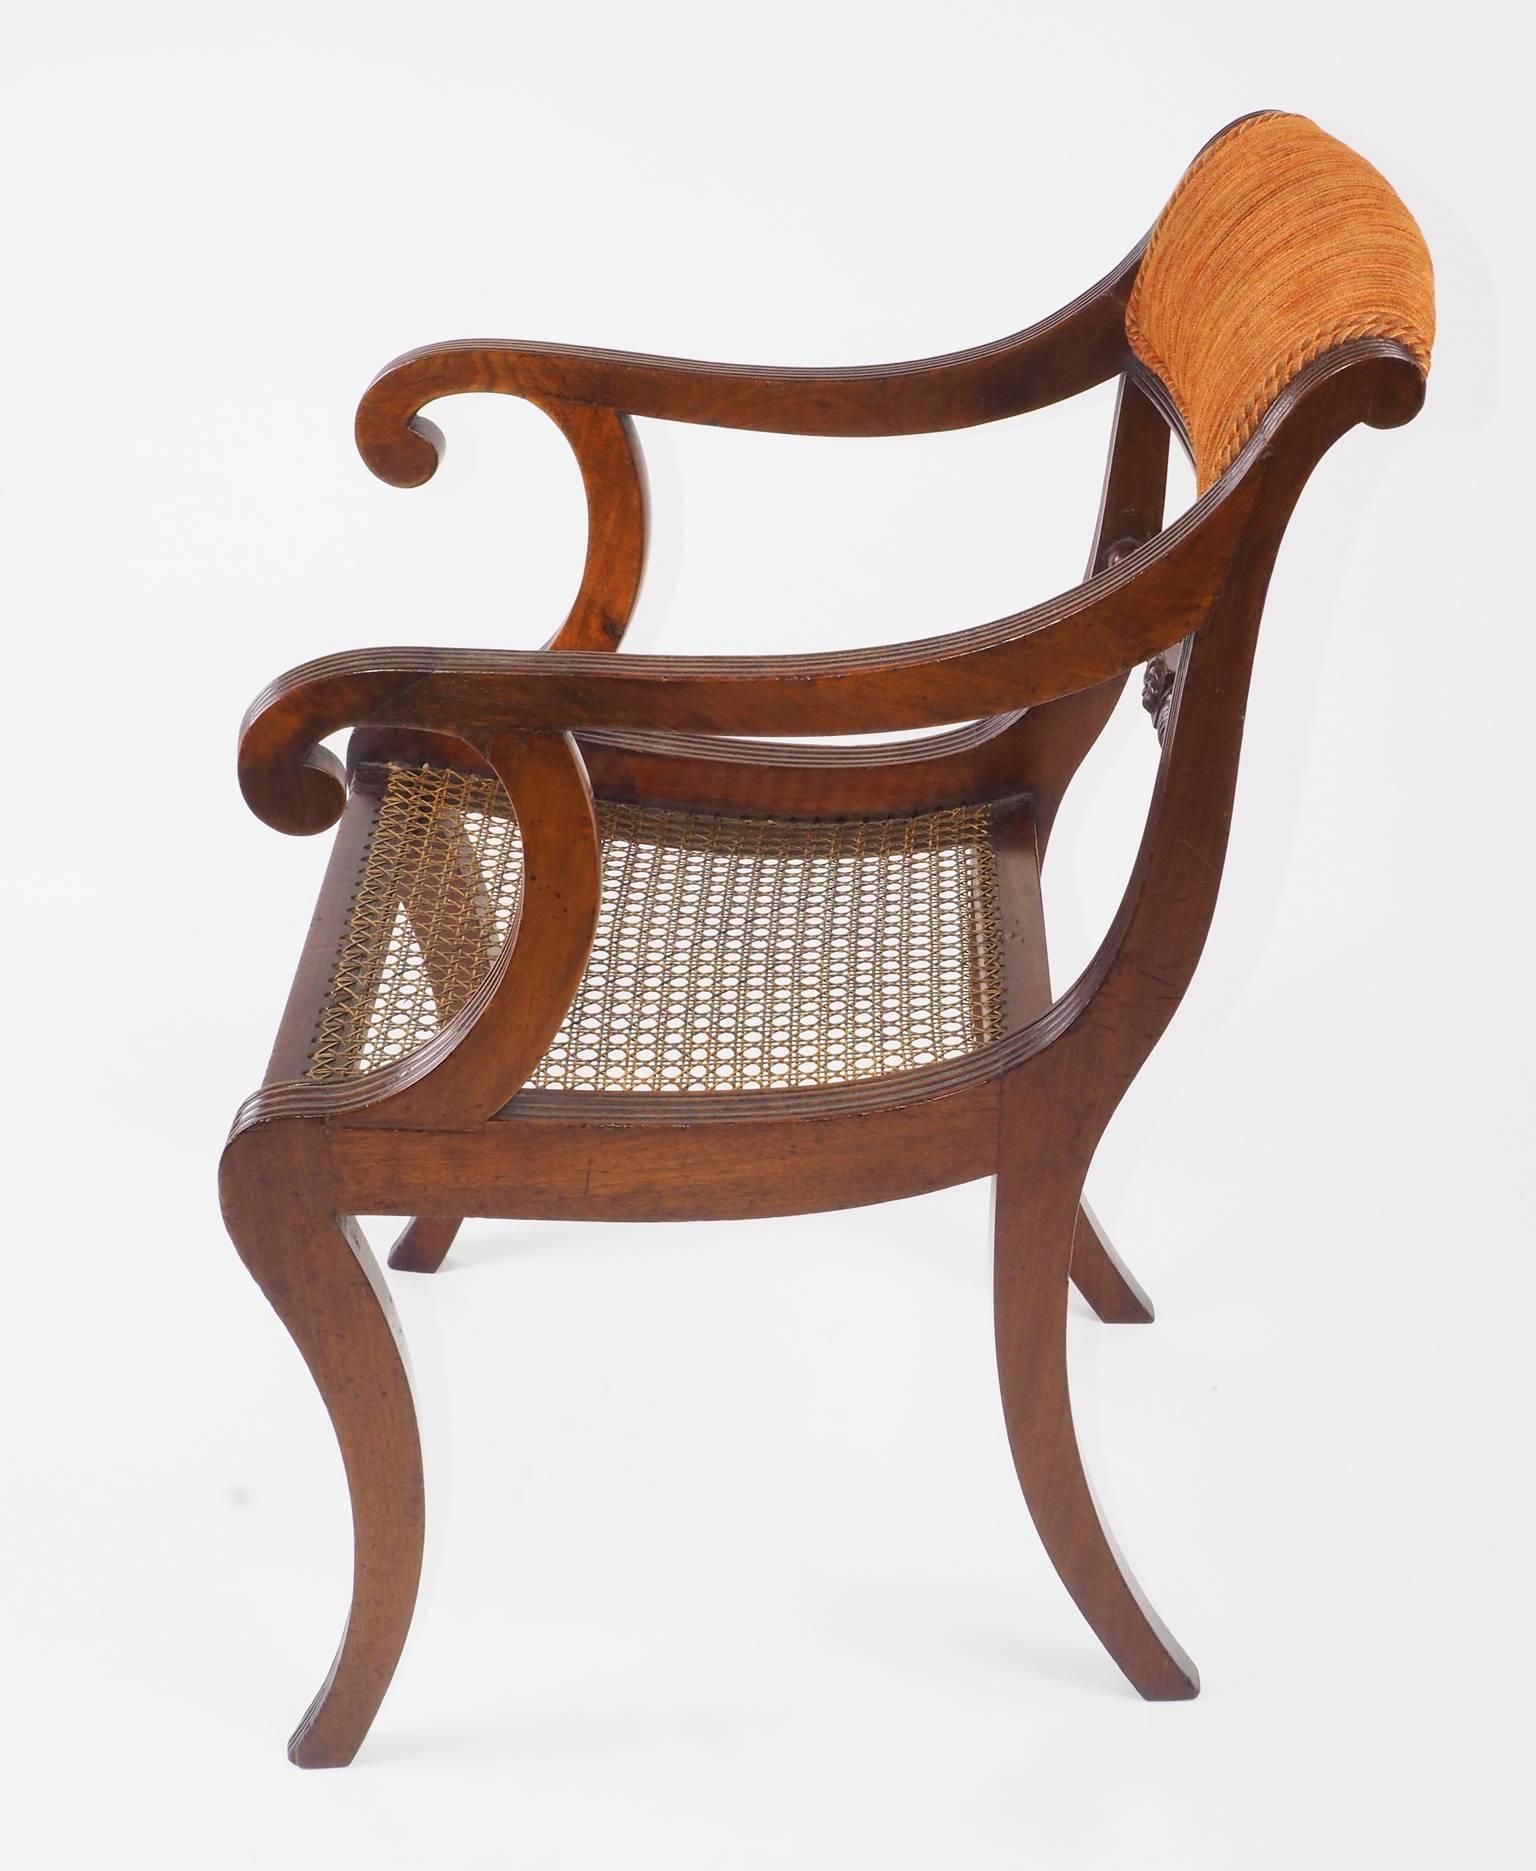 Regency Sabre Legged Mahogany Elbow Chair In Good Condition For Sale In Fremantle, W.Australia